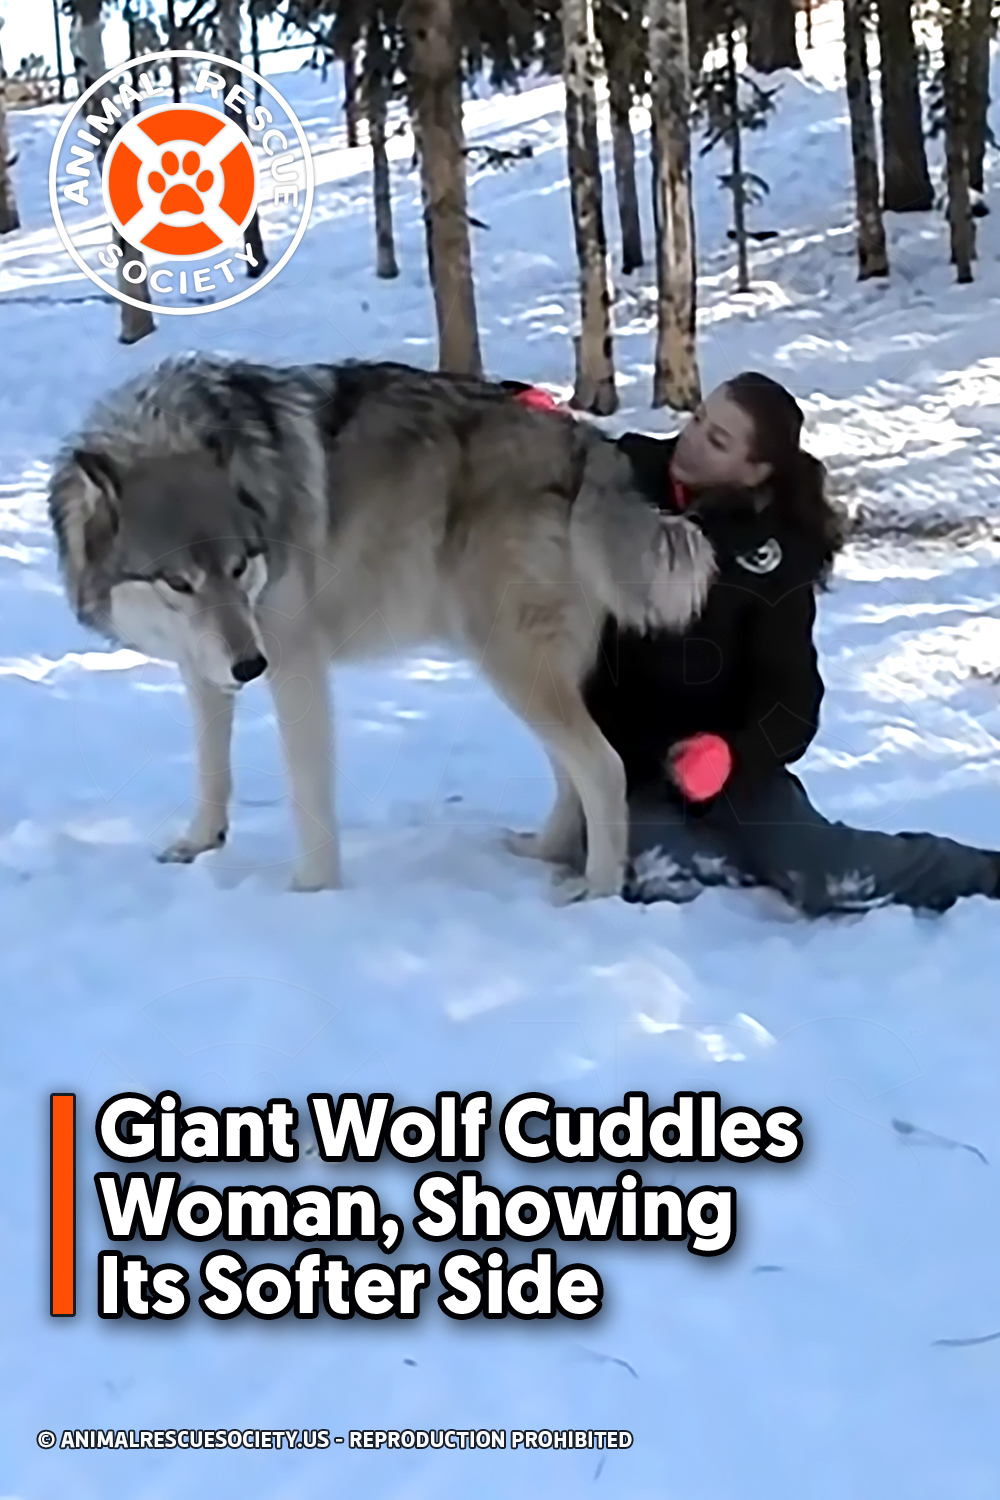 Giant Wolf Cuddles Woman, Showing Its Softer Side